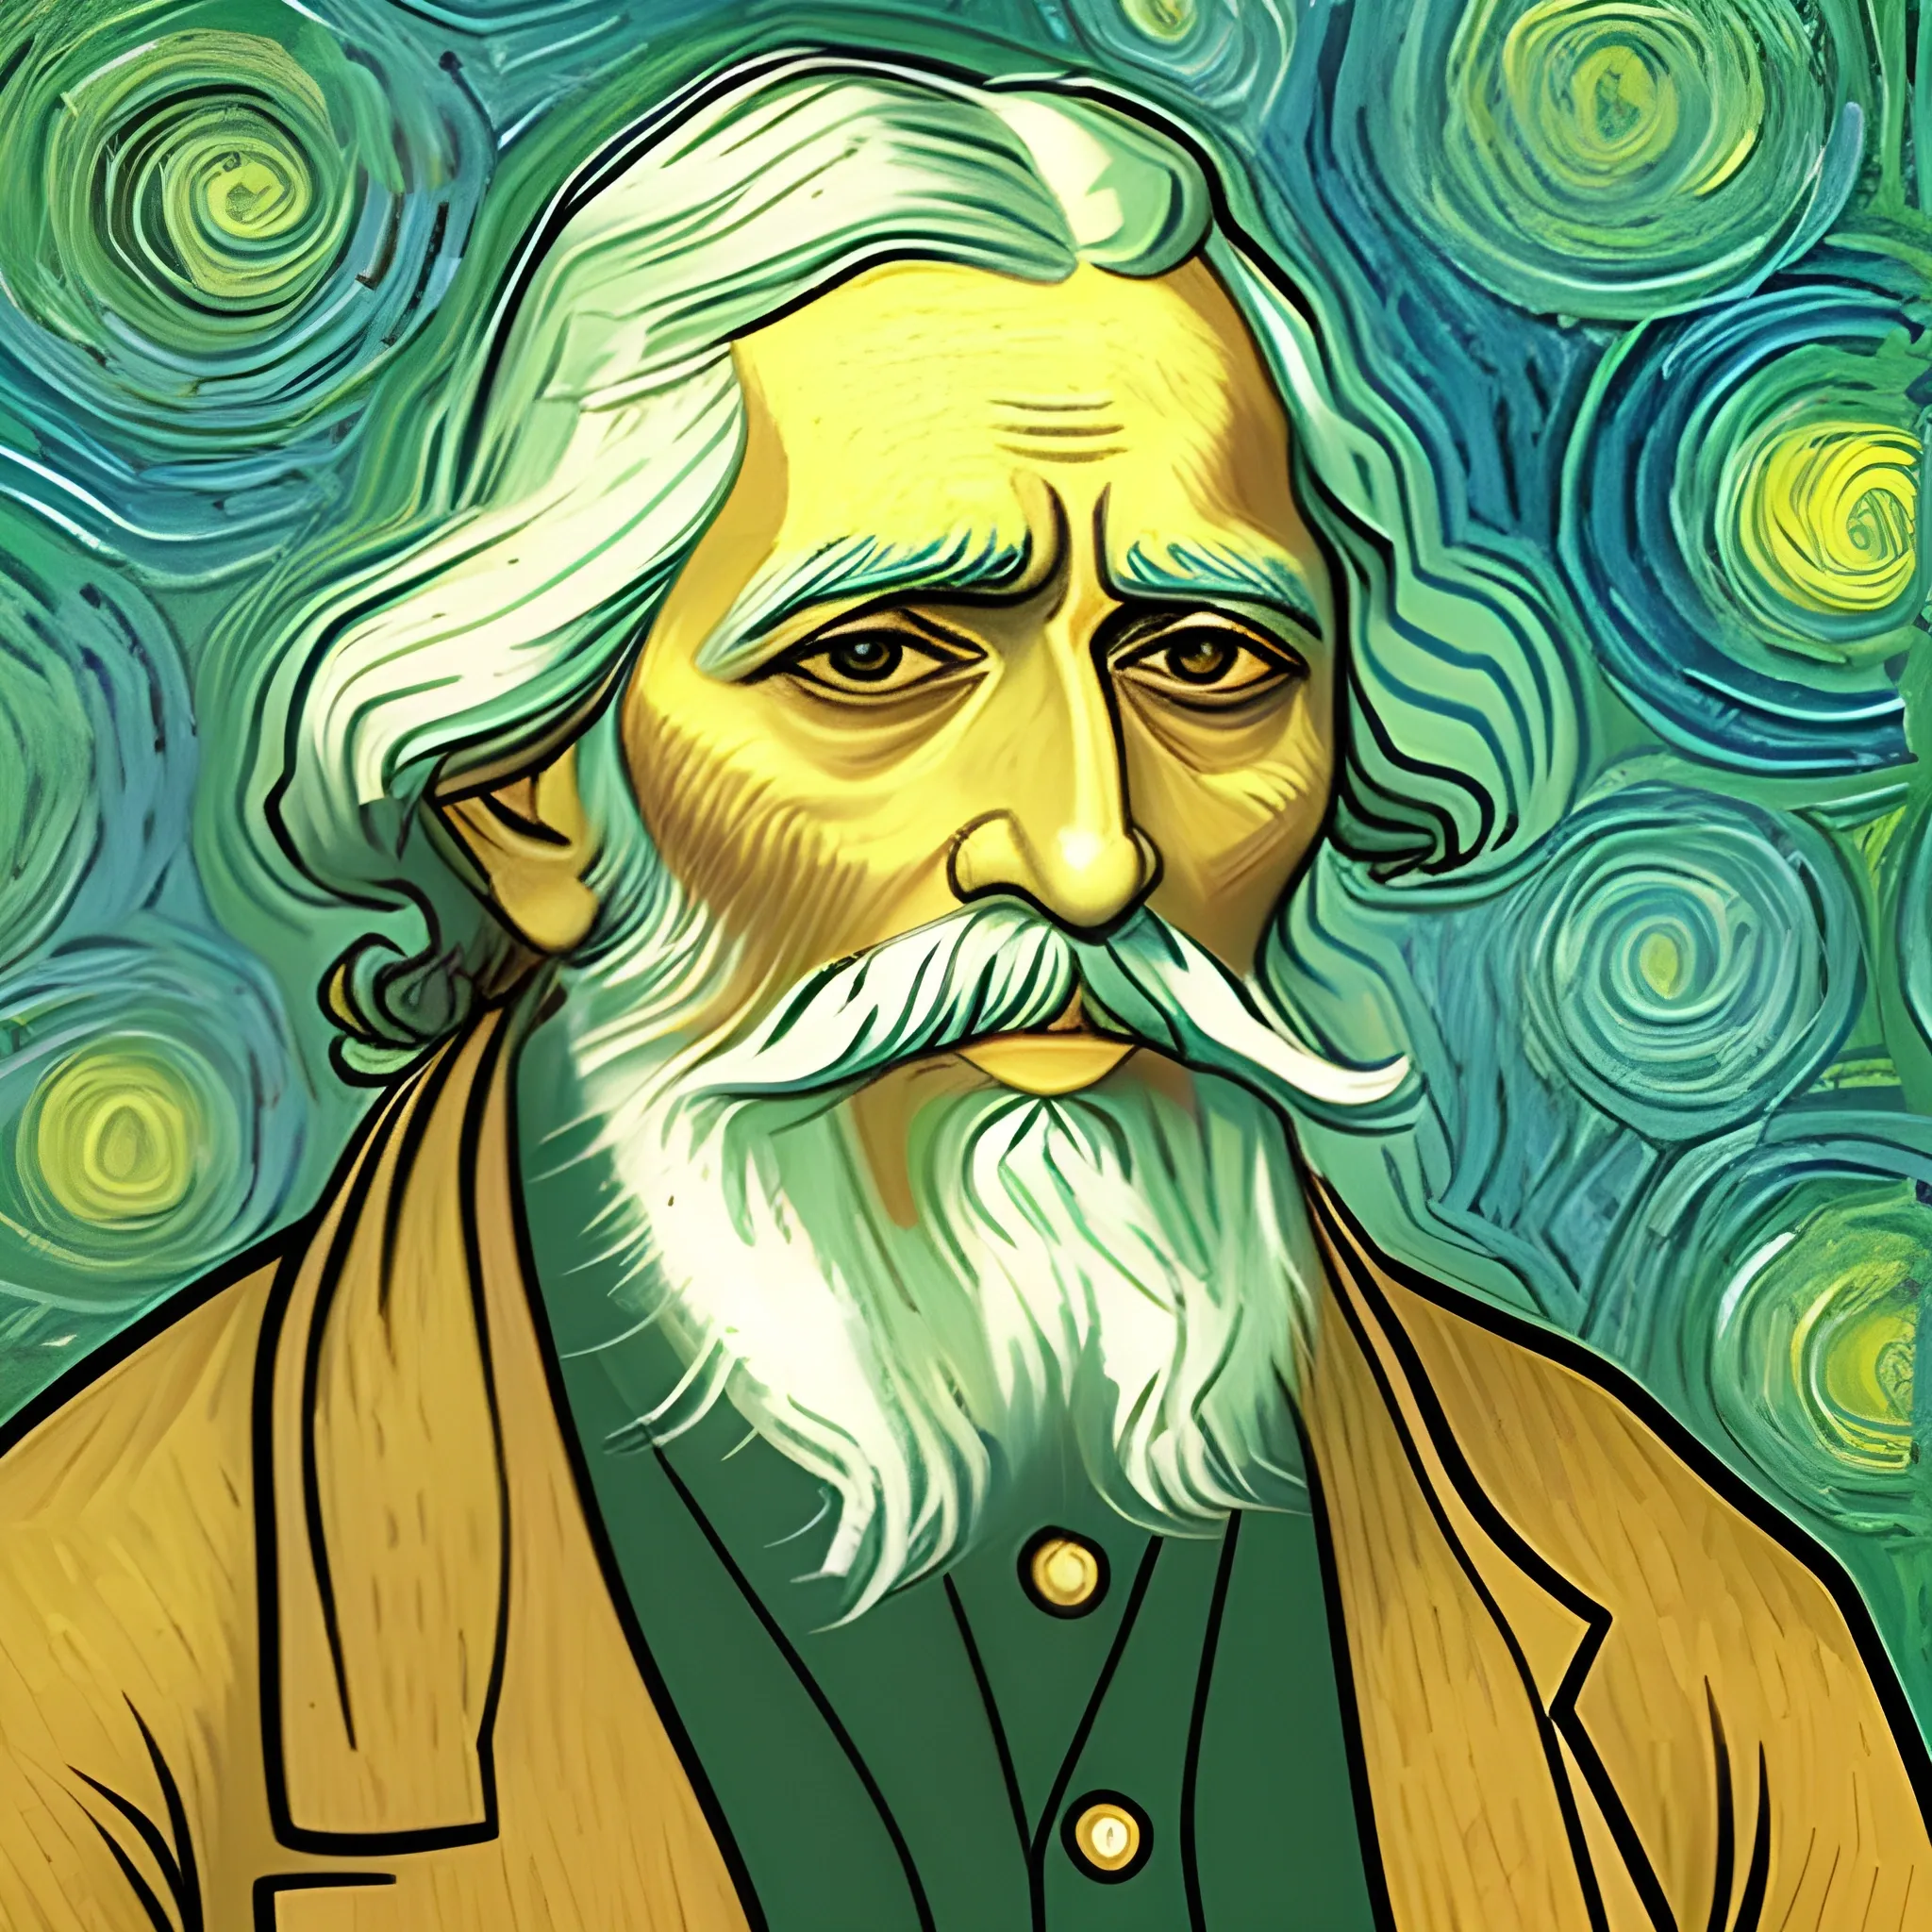 Buy Famous Rabindranath Tagore painting Artwork at Lowest Price By Krishna  Mondal